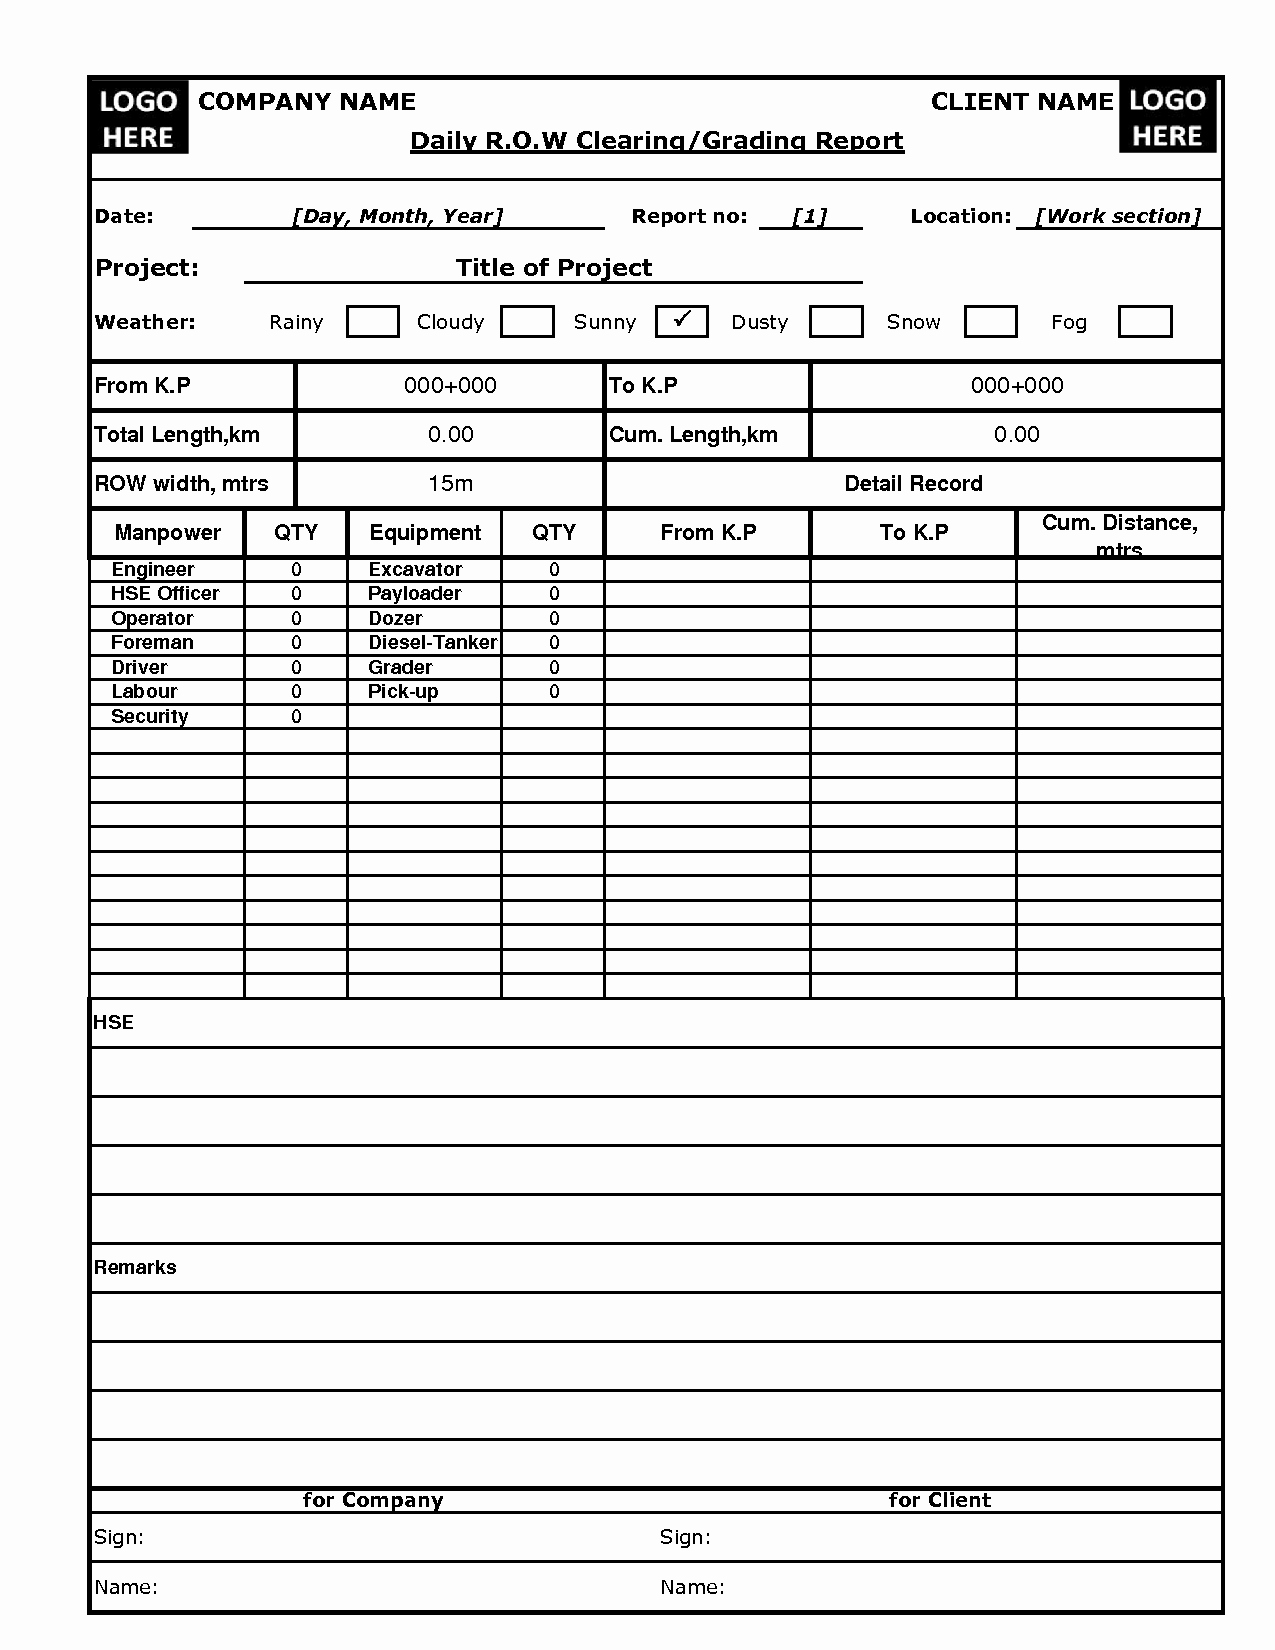 Daily Construction Report Template Lovely Construction Daily Report Template Excel